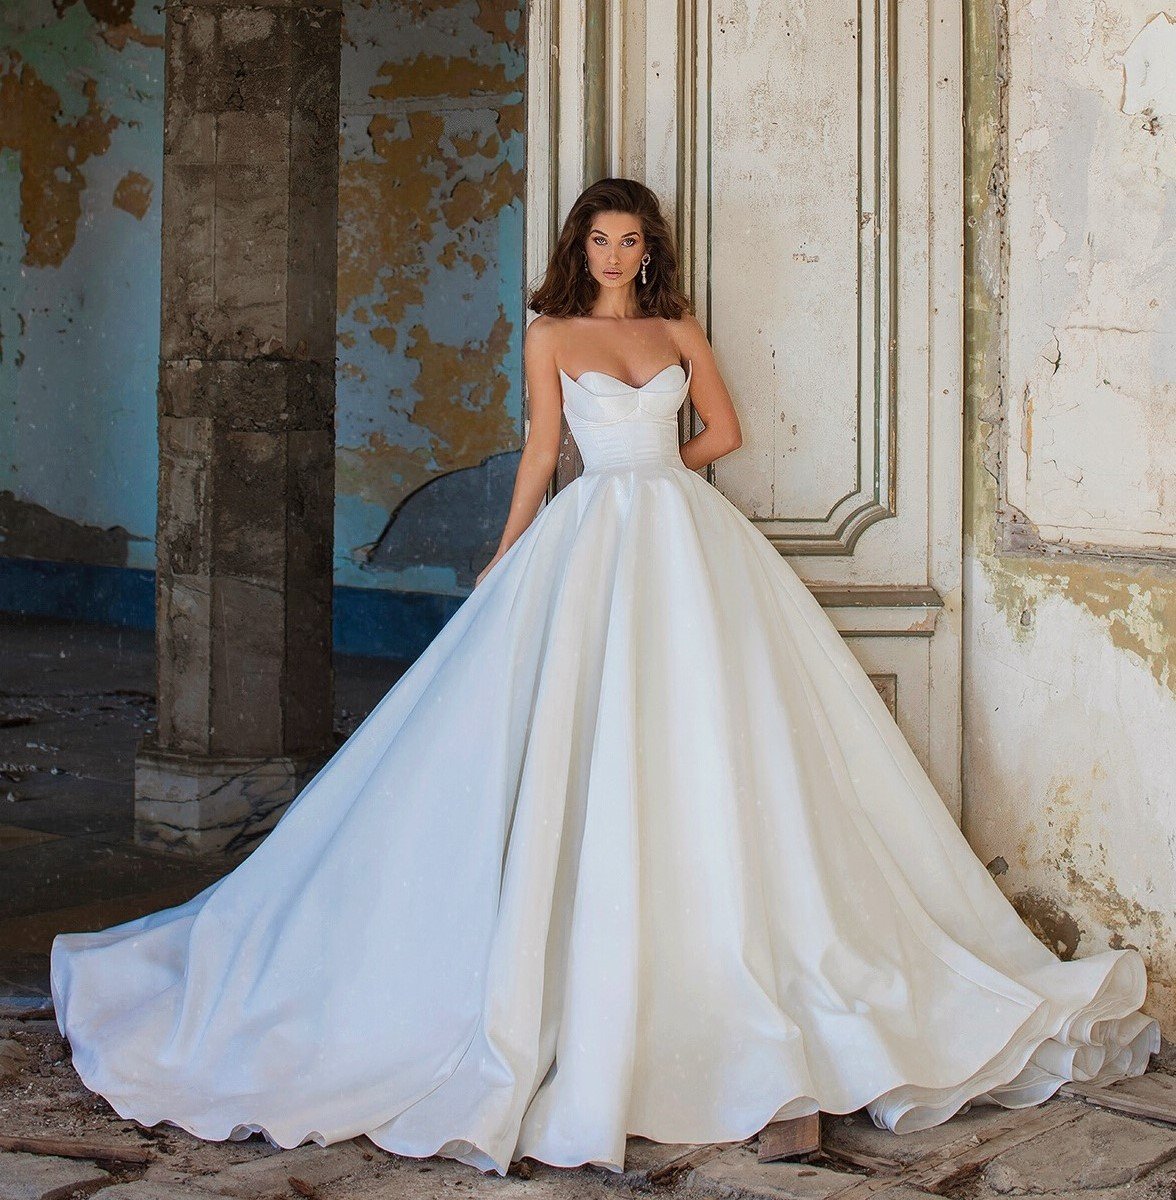 Viero Bridal. Wedding dresses with the wow factor.